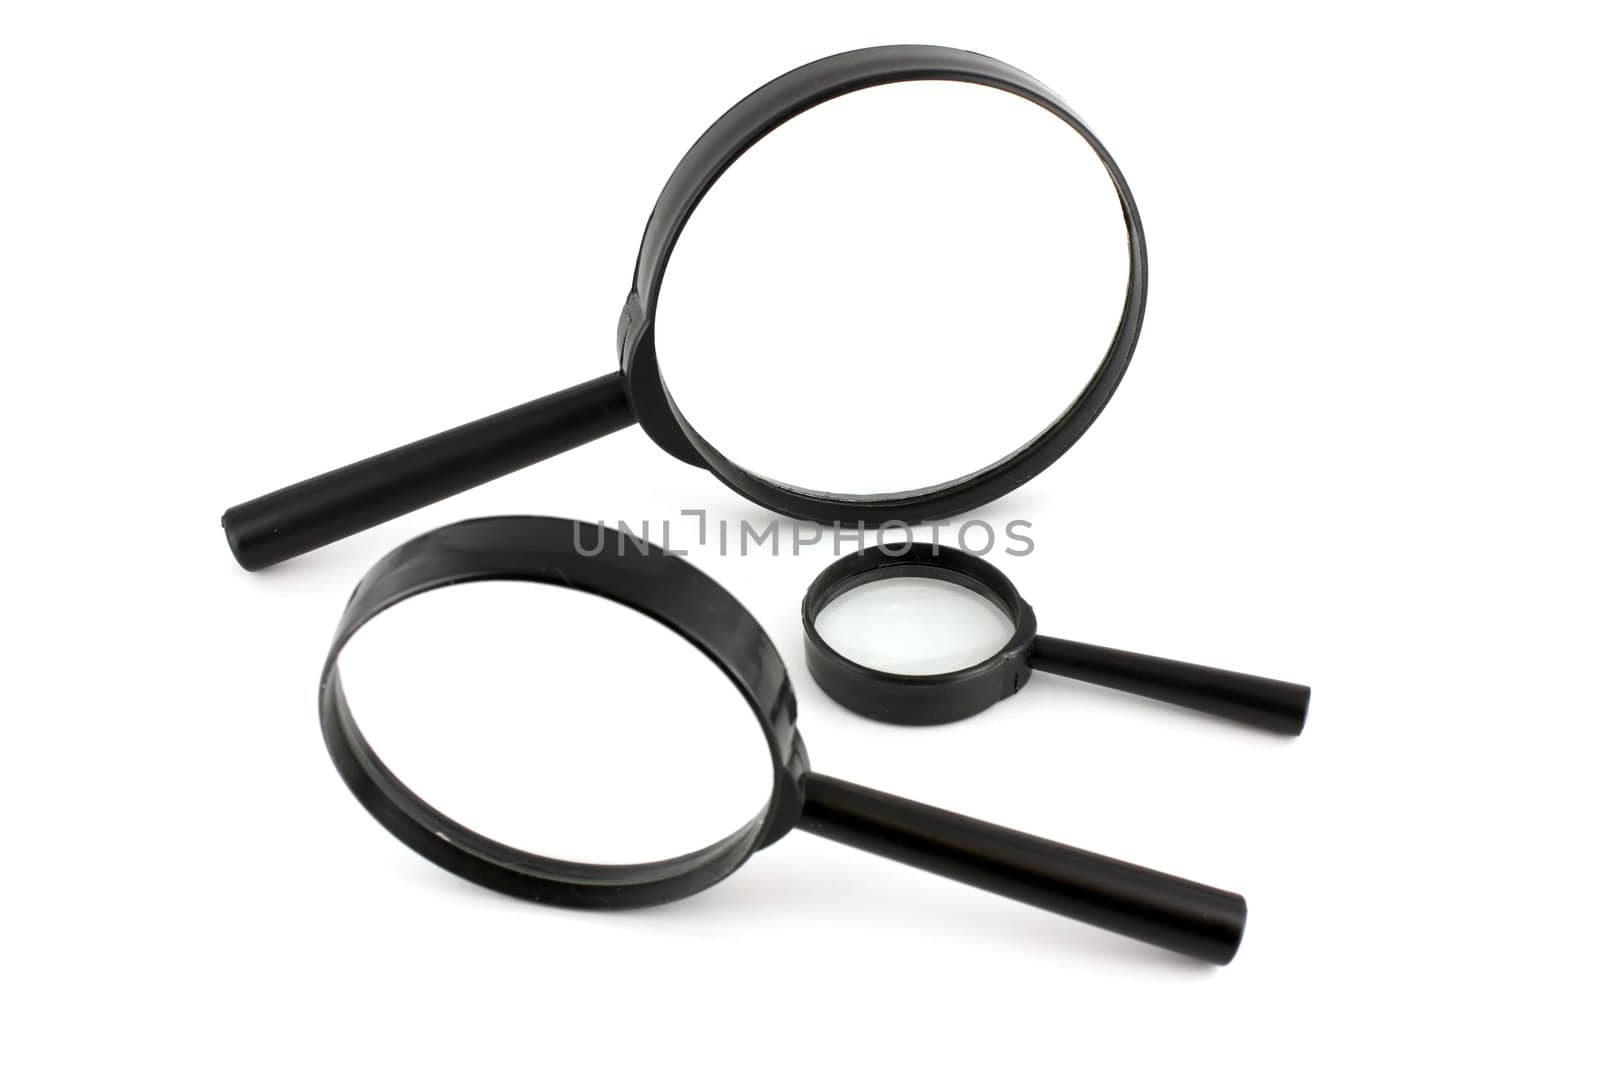 Three magnifiers by sergpet